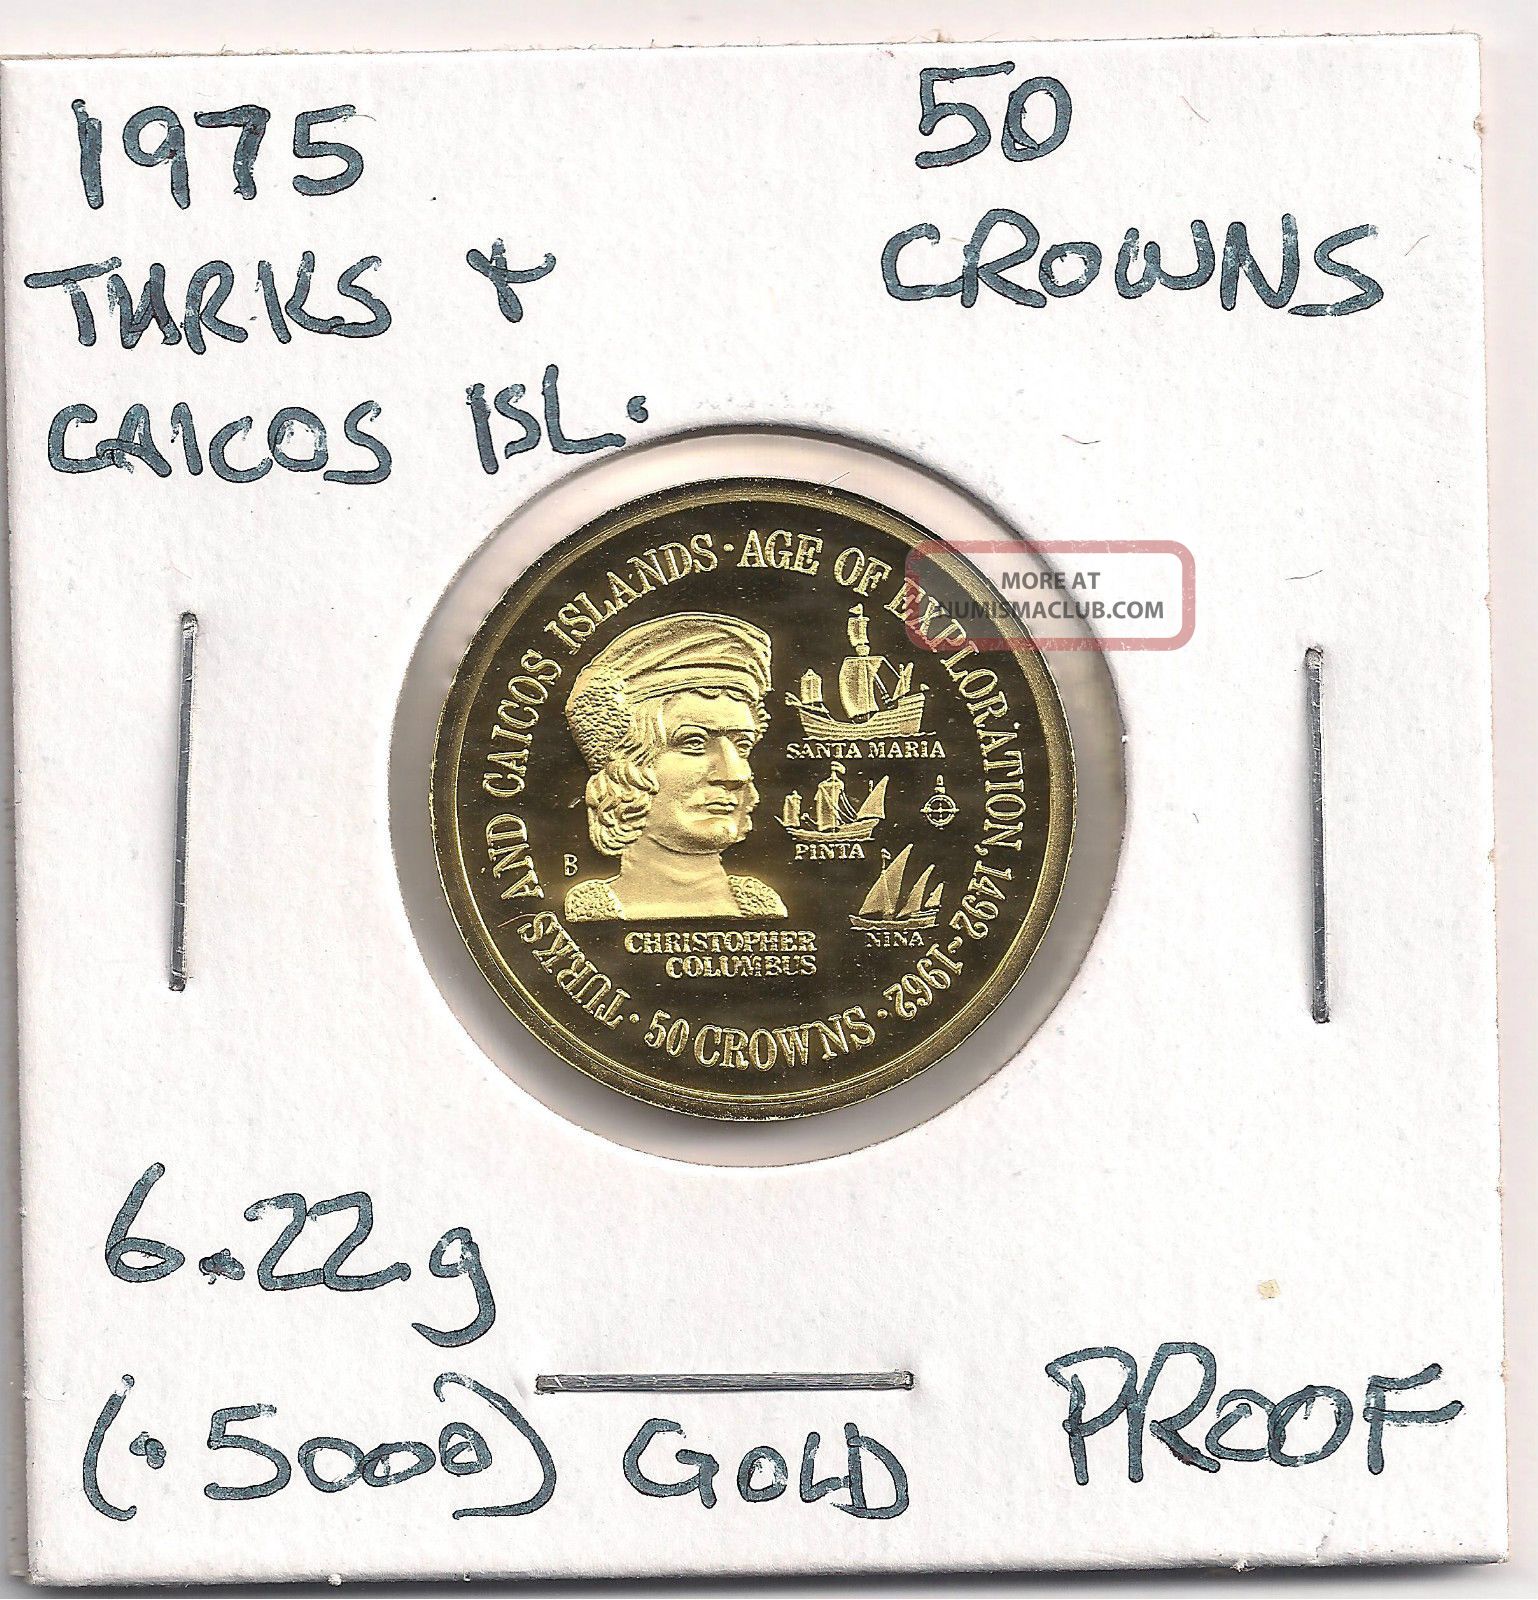 1975 Turks And Caicos Islands 50 Crowns Gold Proof